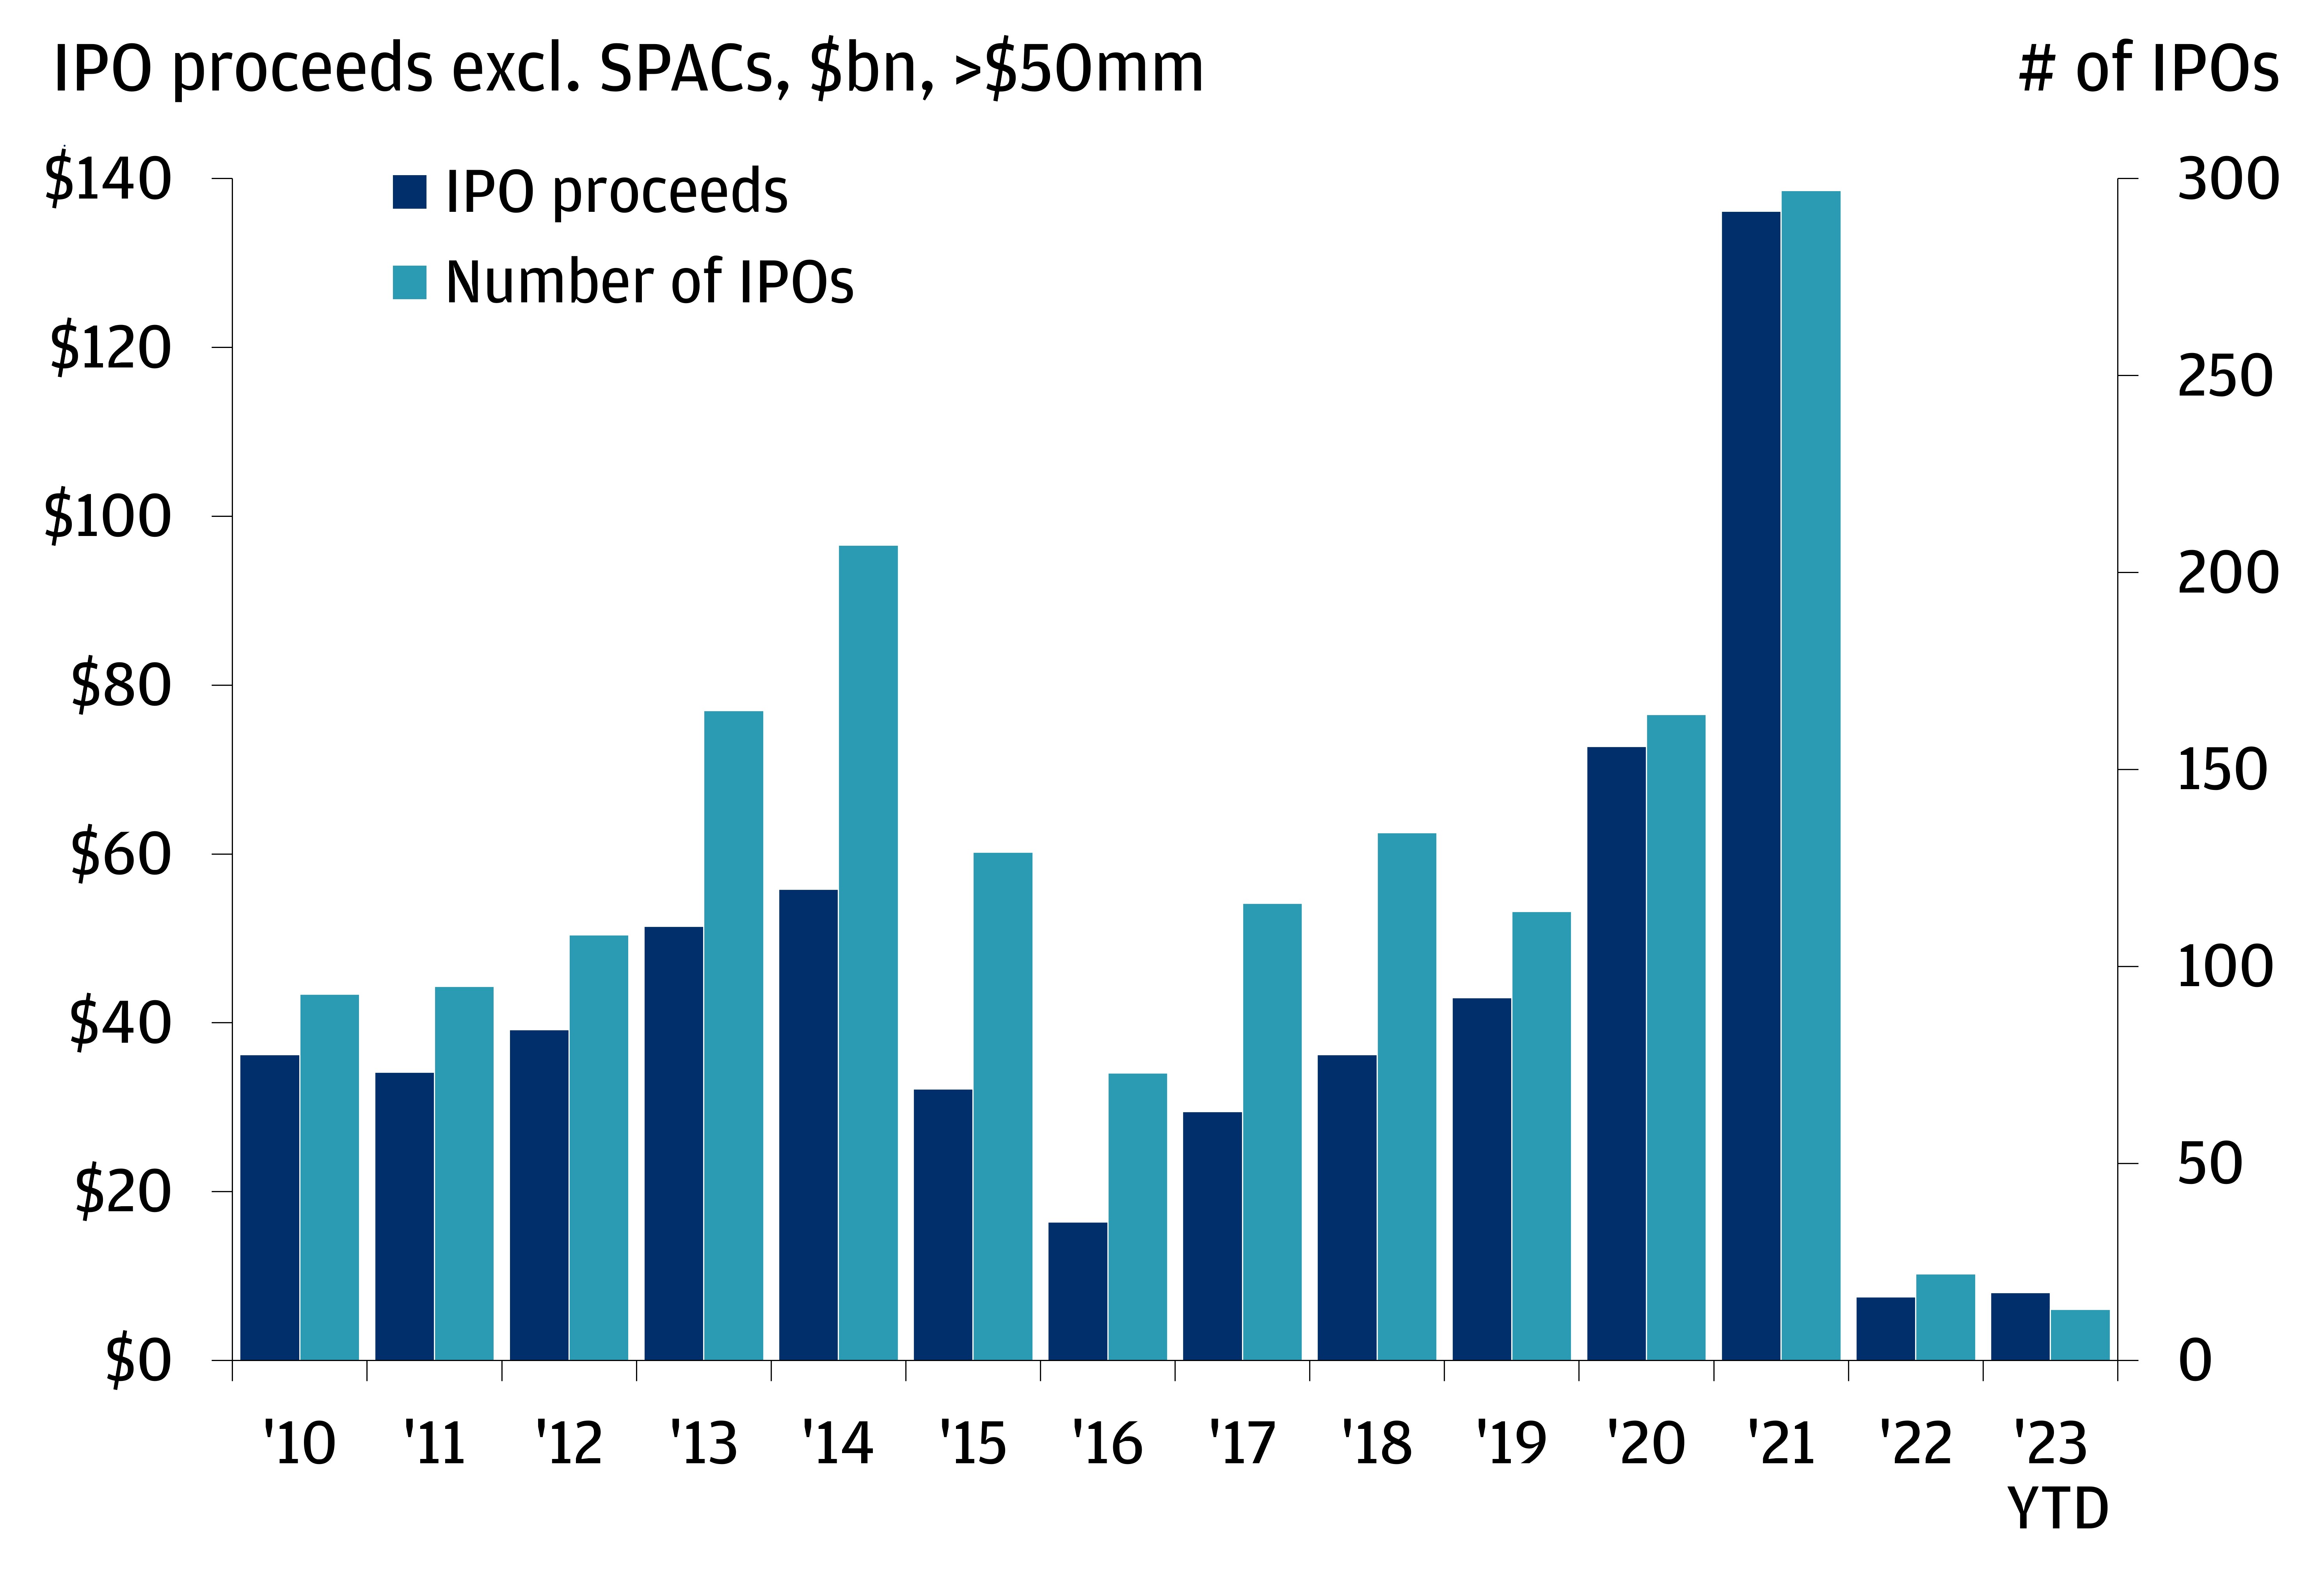 This bar chart shows the IPO (Initial Public Offering) proceeds excluding SPACs (Special Purpose Acquisition Companies) from 2010 to 2023, and the numbers of IPOs each year.